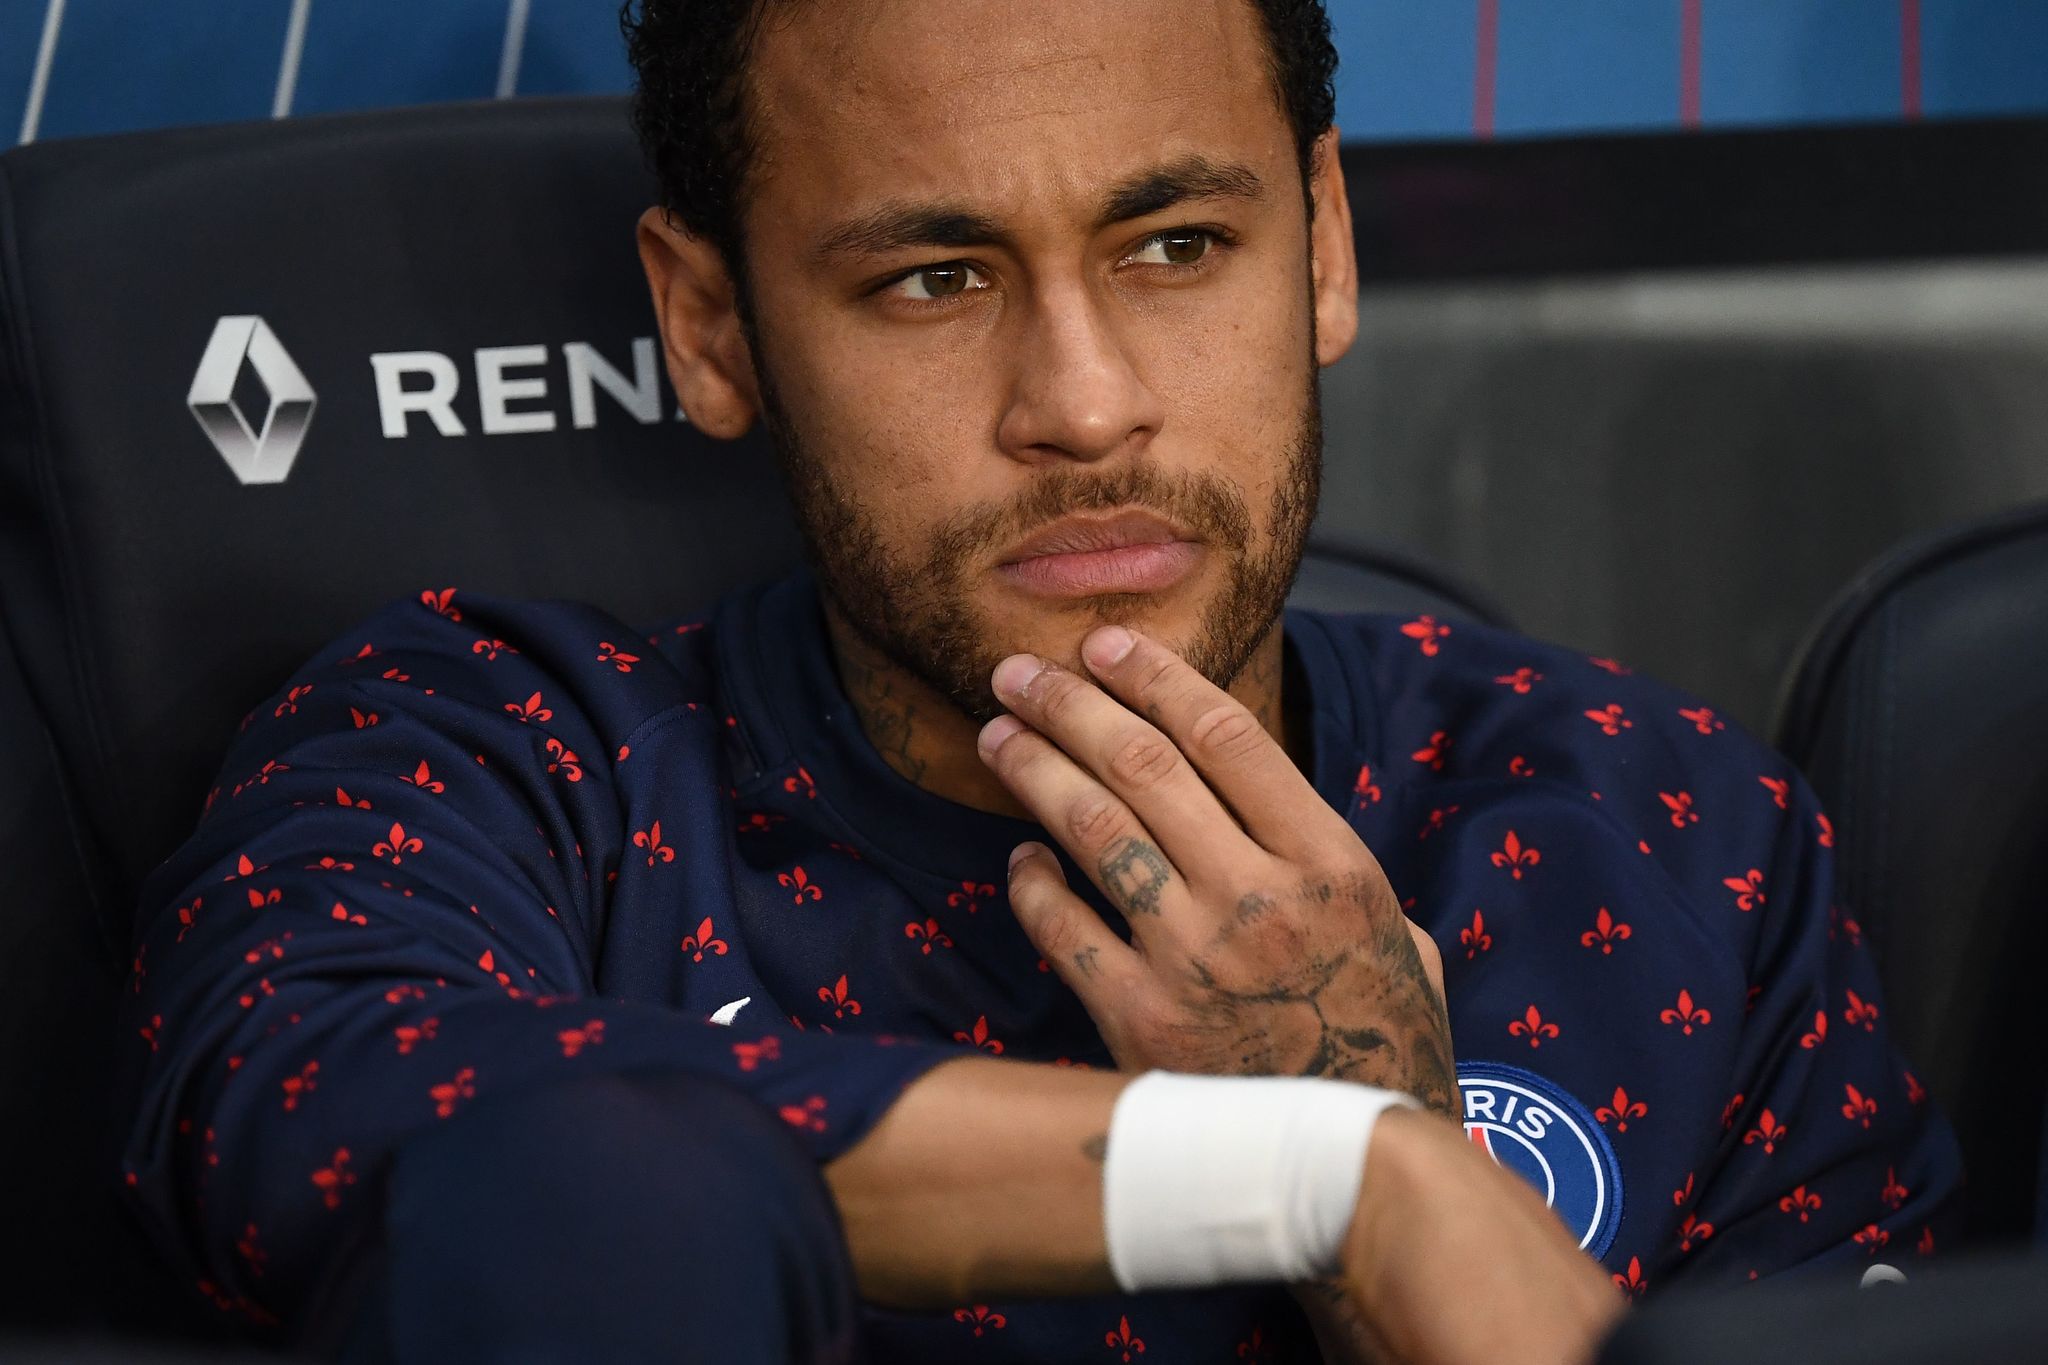 (FILES) In this file photo taken on April 21, 2019 Paris Saint-Germains Brazilian forward <HIT>Neymar</HIT> looks on during the French L1 football match between Paris Saint-Germain (PSG) and Monaco (ASM) at the Parc des Princes stadium in Paris. - <HIT>Neymar</HIT> will not feature in Paris Saint-Germains last two games of their pre-season tour of Asia, French media reported on July 28, 2019. He will also miss the French Champions Trophy against Rennes in Shenzhen on August 3, 2019 as he completes a six-match domestic ban for an incident involving a fan the last time the teams met, in the French Cup final. (Photo by Anne-Christine POUJOULAT / AFP)